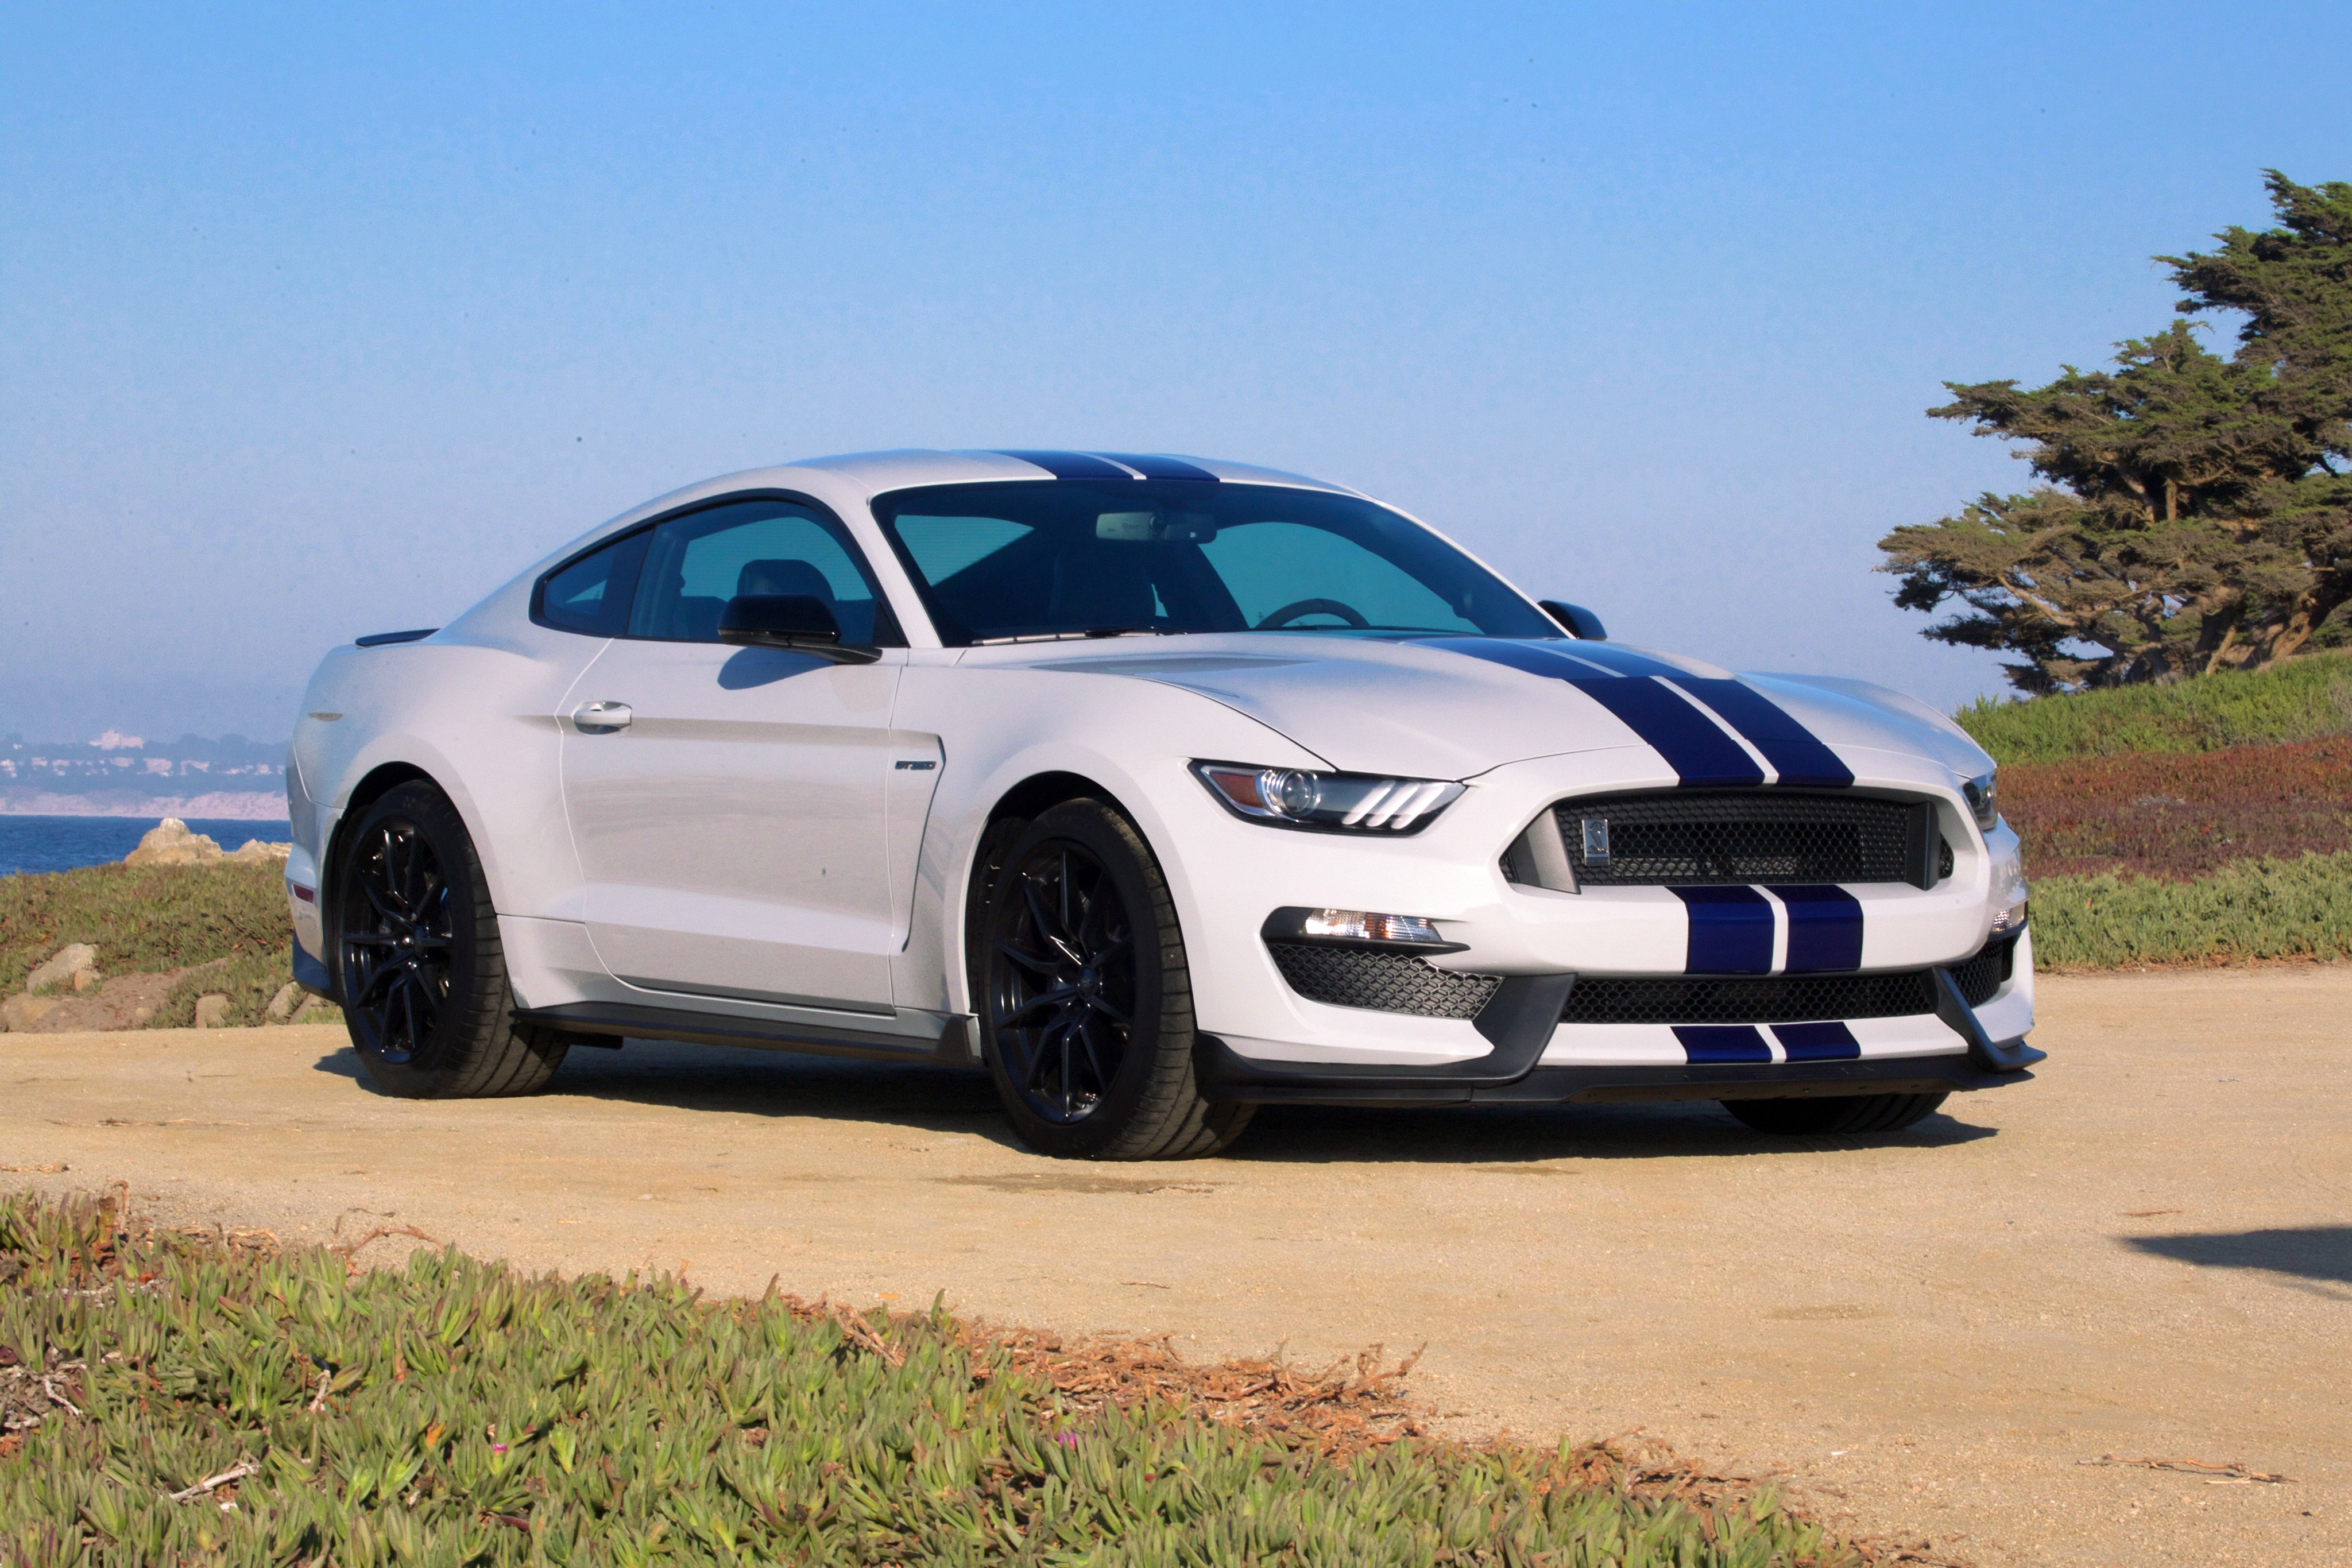 2016, Shelby, Gt350, Mustang, Ford, Muscle Wallpaper